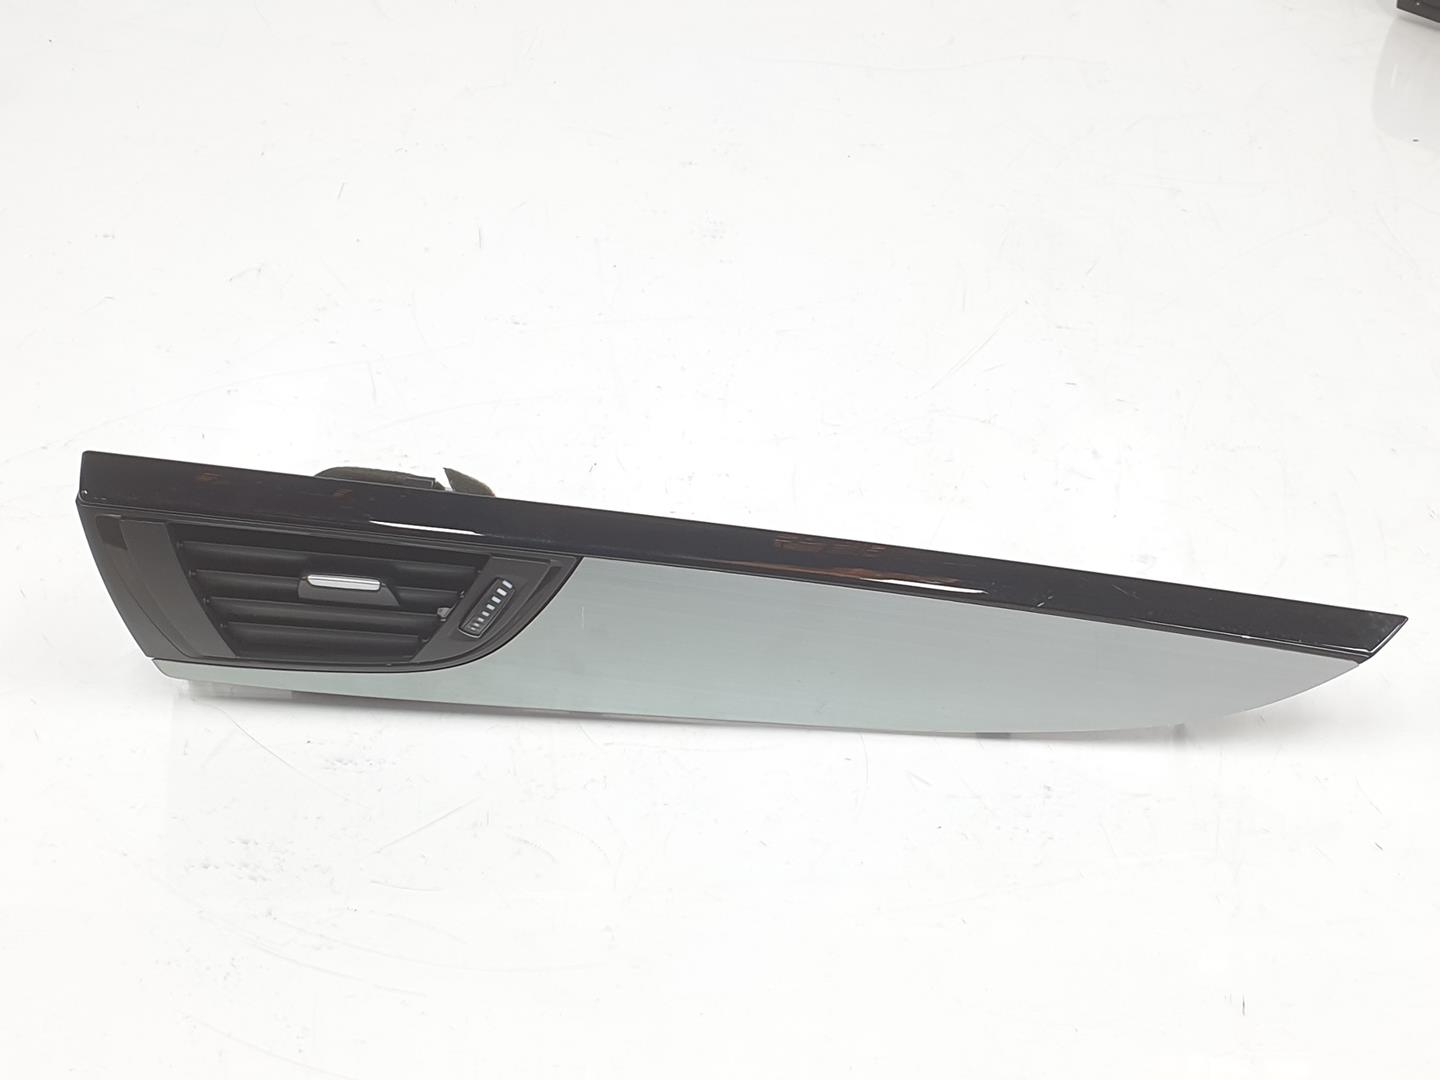 BMW 1 Series F20/F21 (2011-2020) Other Interior Parts 51459205364, 64229205356 19898156